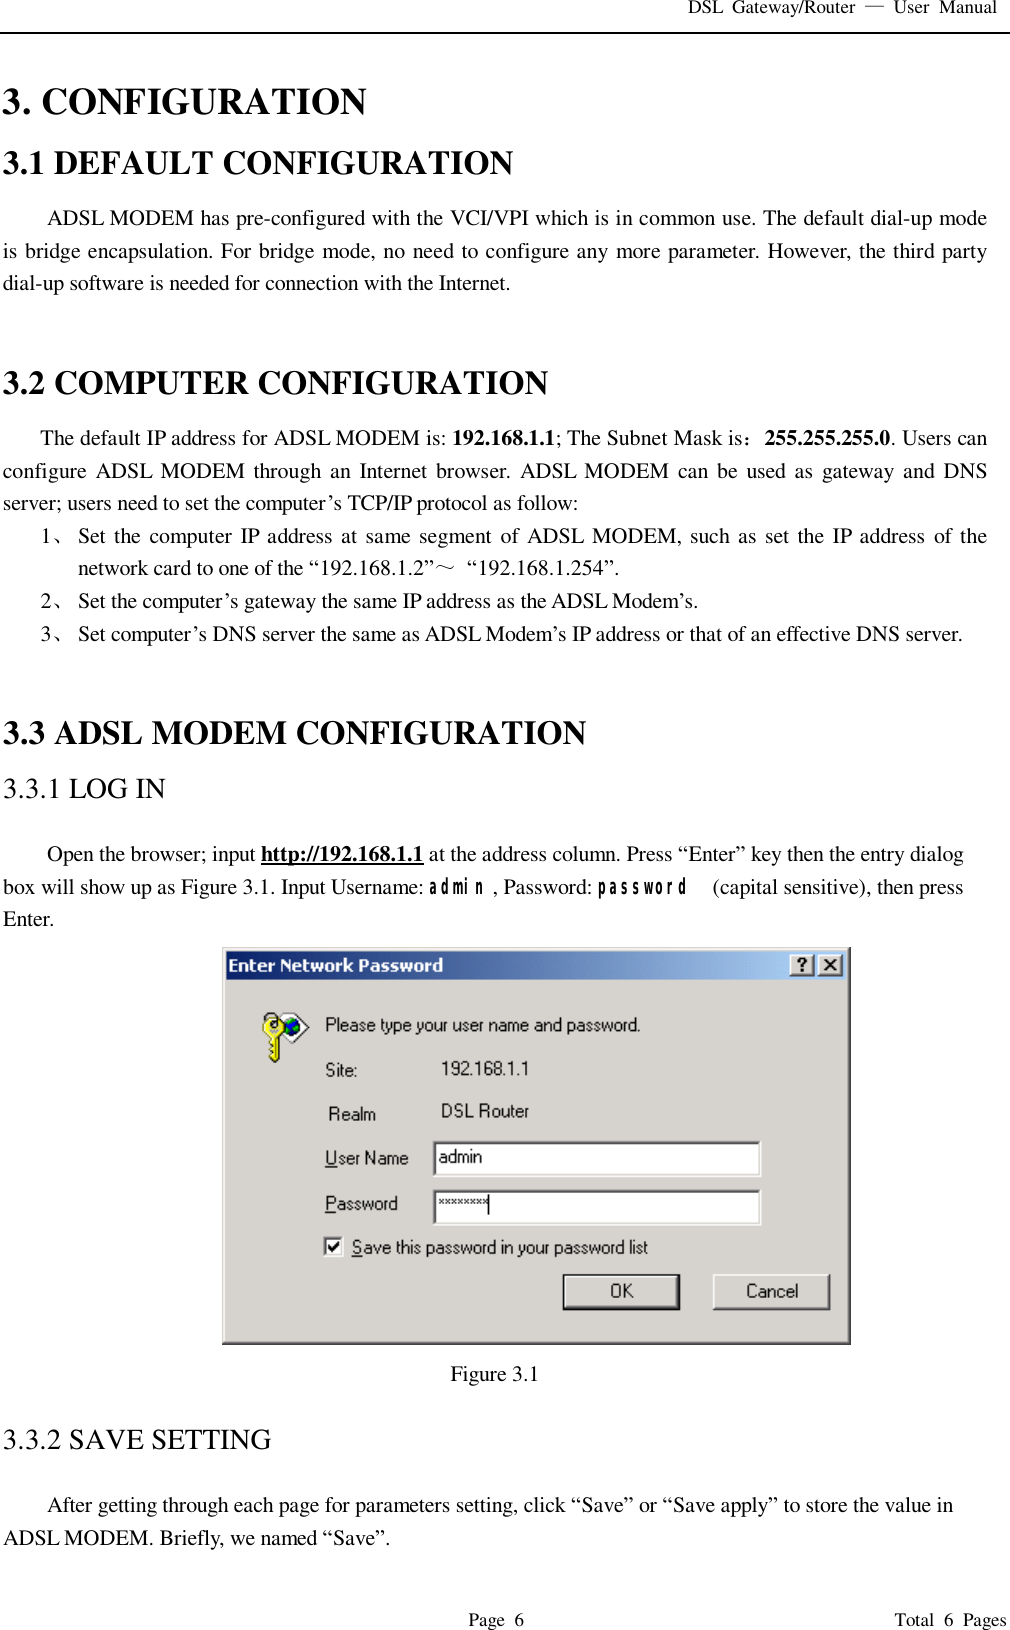 DSL Gateway/Router  — User Manual  Page 6                                       Total 6 Pages 3. CONFIGURATION 3.1 DEFAULT CONFIGURATION ADSL MODEM has pre-configured with the VCI/VPI which is in common use. The default dial-up mode is bridge encapsulation. For bridge mode, no need to configure any more parameter. However, the third party dial-up software is needed for connection with the Internet.   3.2 COMPUTER CONFIGURATION The default IP address for ADSL MODEM is: 192.168.1.1; The Subnet Mask is：255.255.255.0. Users can configure ADSL MODEM through an Internet browser. ADSL MODEM can be used as gateway and DNS server; users need to set the computer’s TCP/IP protocol as follow: 1、 Set the computer IP address at same segment of ADSL MODEM, such as set the IP address of the network card to one of the “192.168.1.2”～ “192.168.1.254”. 2、 Set the computer’s gateway the same IP address as the ADSL Modem’s. 3、 Set computer’s DNS server the same as ADSL Modem’s IP address or that of an effective DNS server.   3.3 ADSL MODEM CONFIGURATION 3.3.1 LOG IN  Open the browser; input http://192.168.1.1 at the address column. Press “Enter” key then the entry dialog box will show up as Figure 3.1. Input Username: admin , Password: password  (capital sensitive), then press Enter.                                     Figure 3.1  3.3.2 SAVE SETTING  After getting through each page for parameters setting, click “Save” or “Save apply” to store the value in ADSL MODEM. Briefly, we named “Save”. 